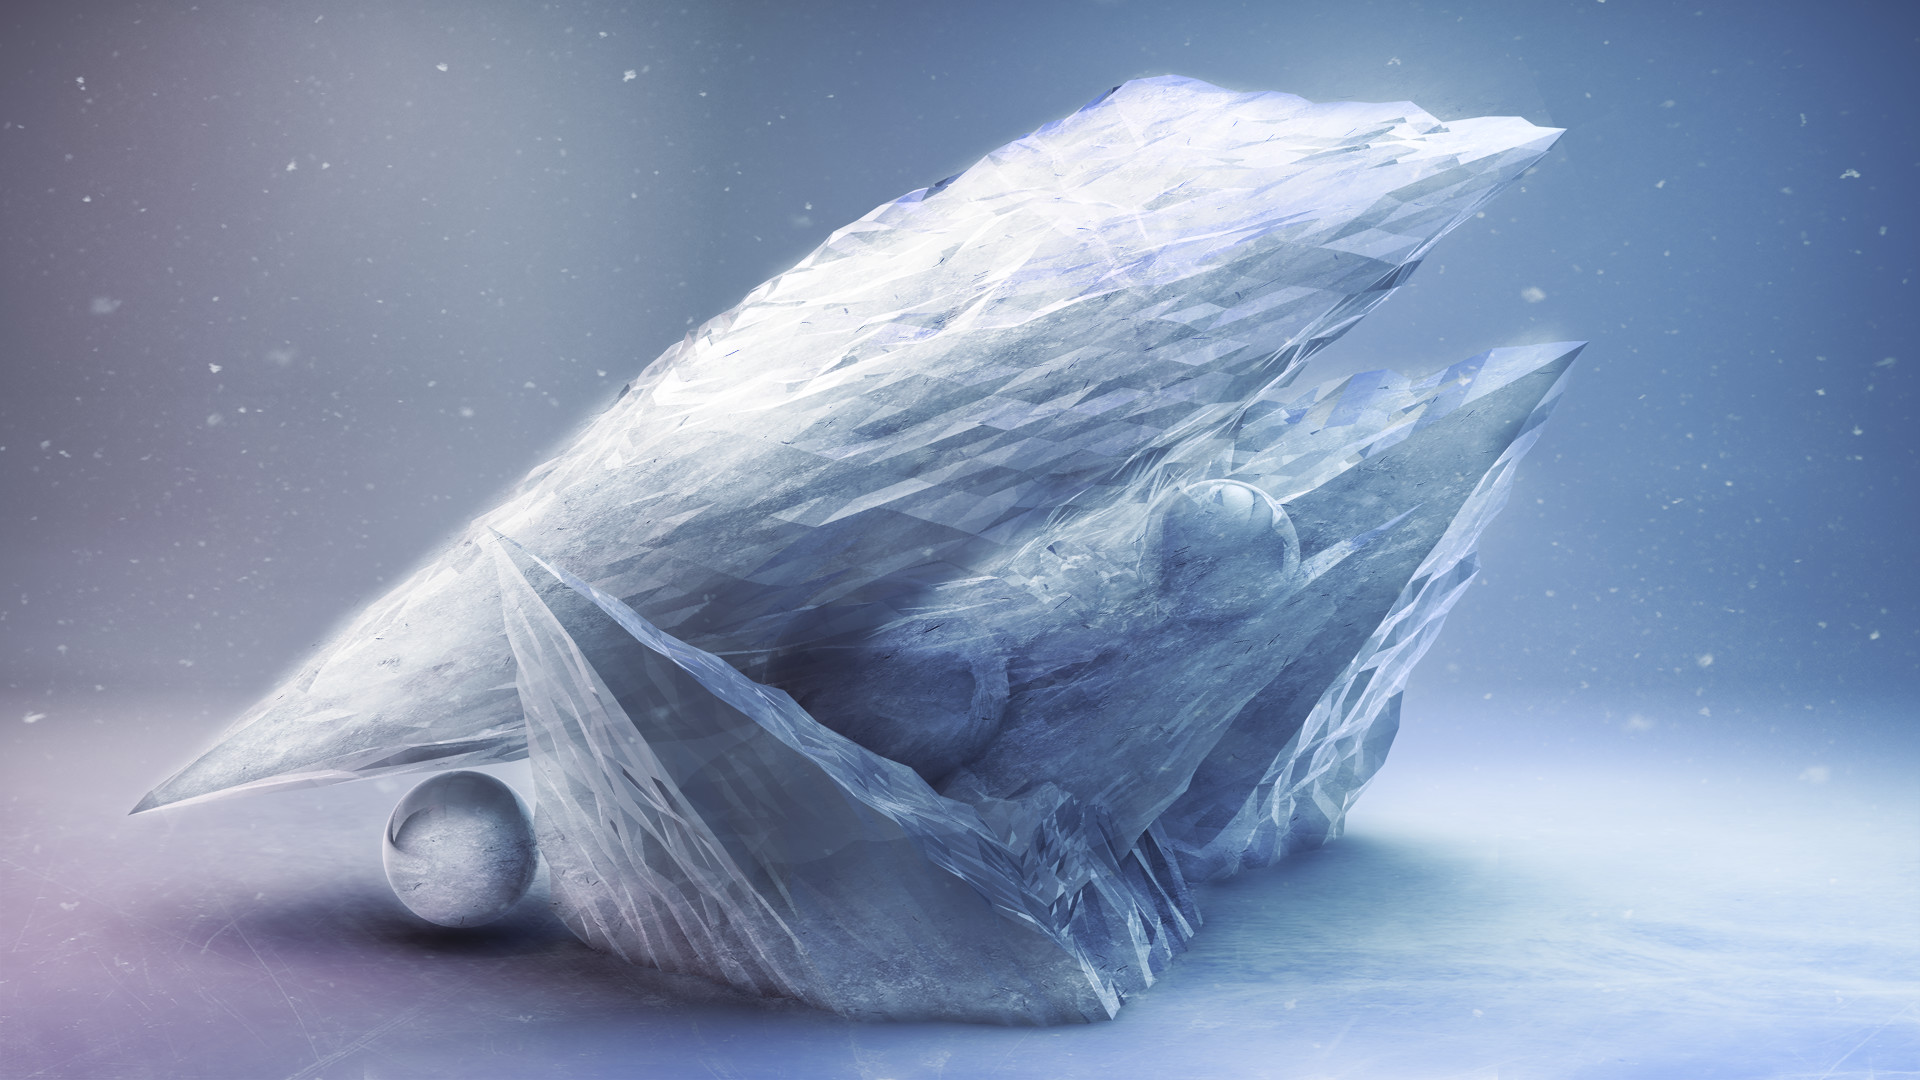 chill wallpaper hd,atmosphere,space,iceberg,plastic bag,ice